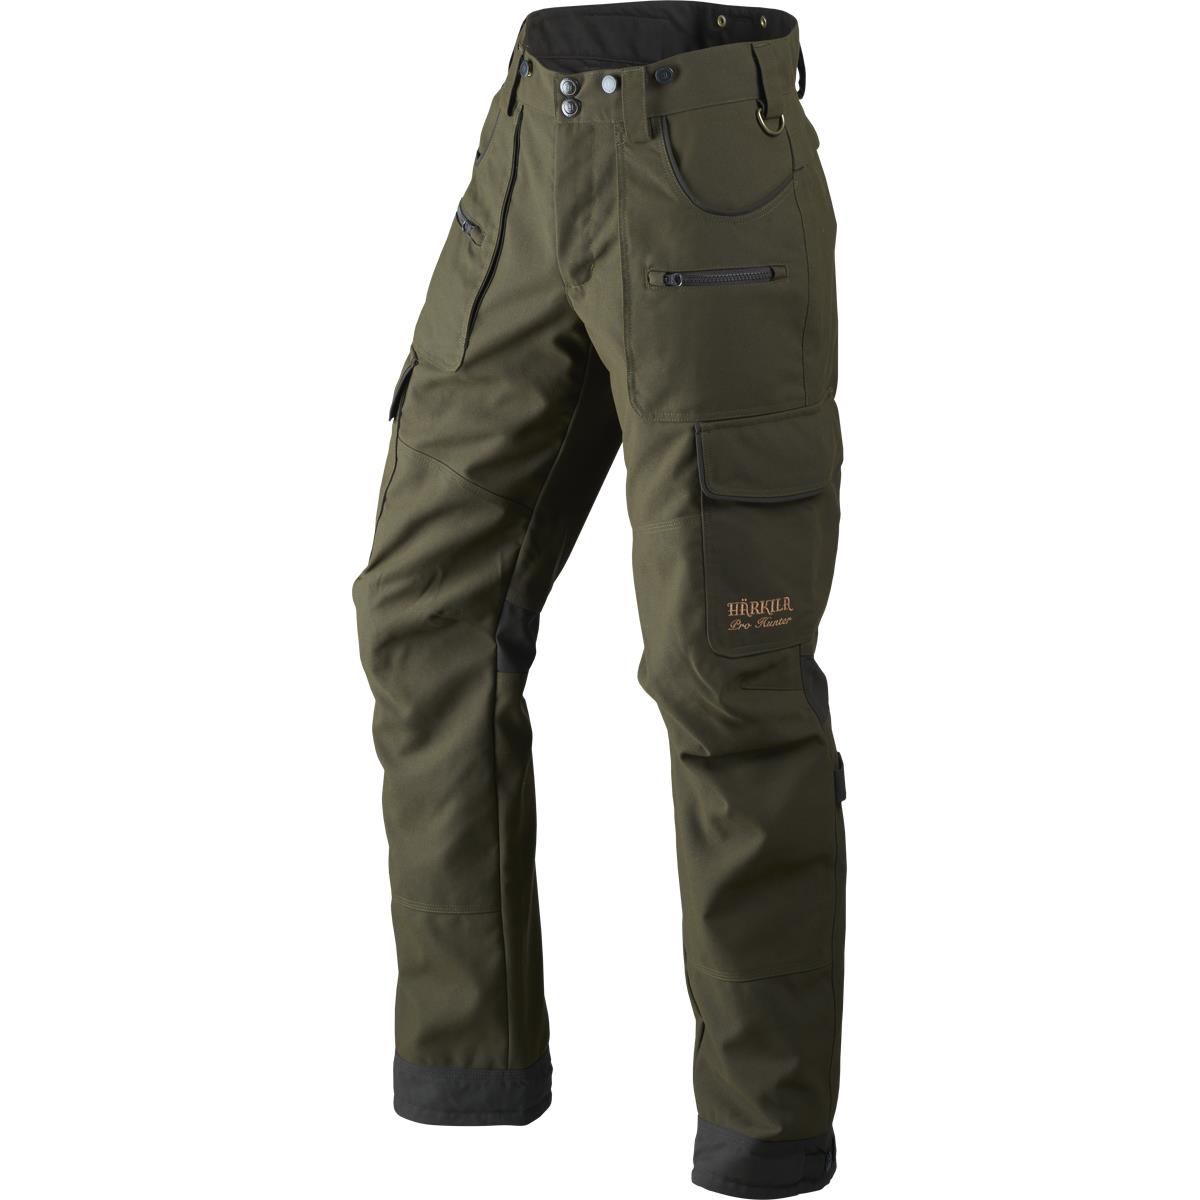 Which pockets are in the Harkila Pro Hunter trousers?